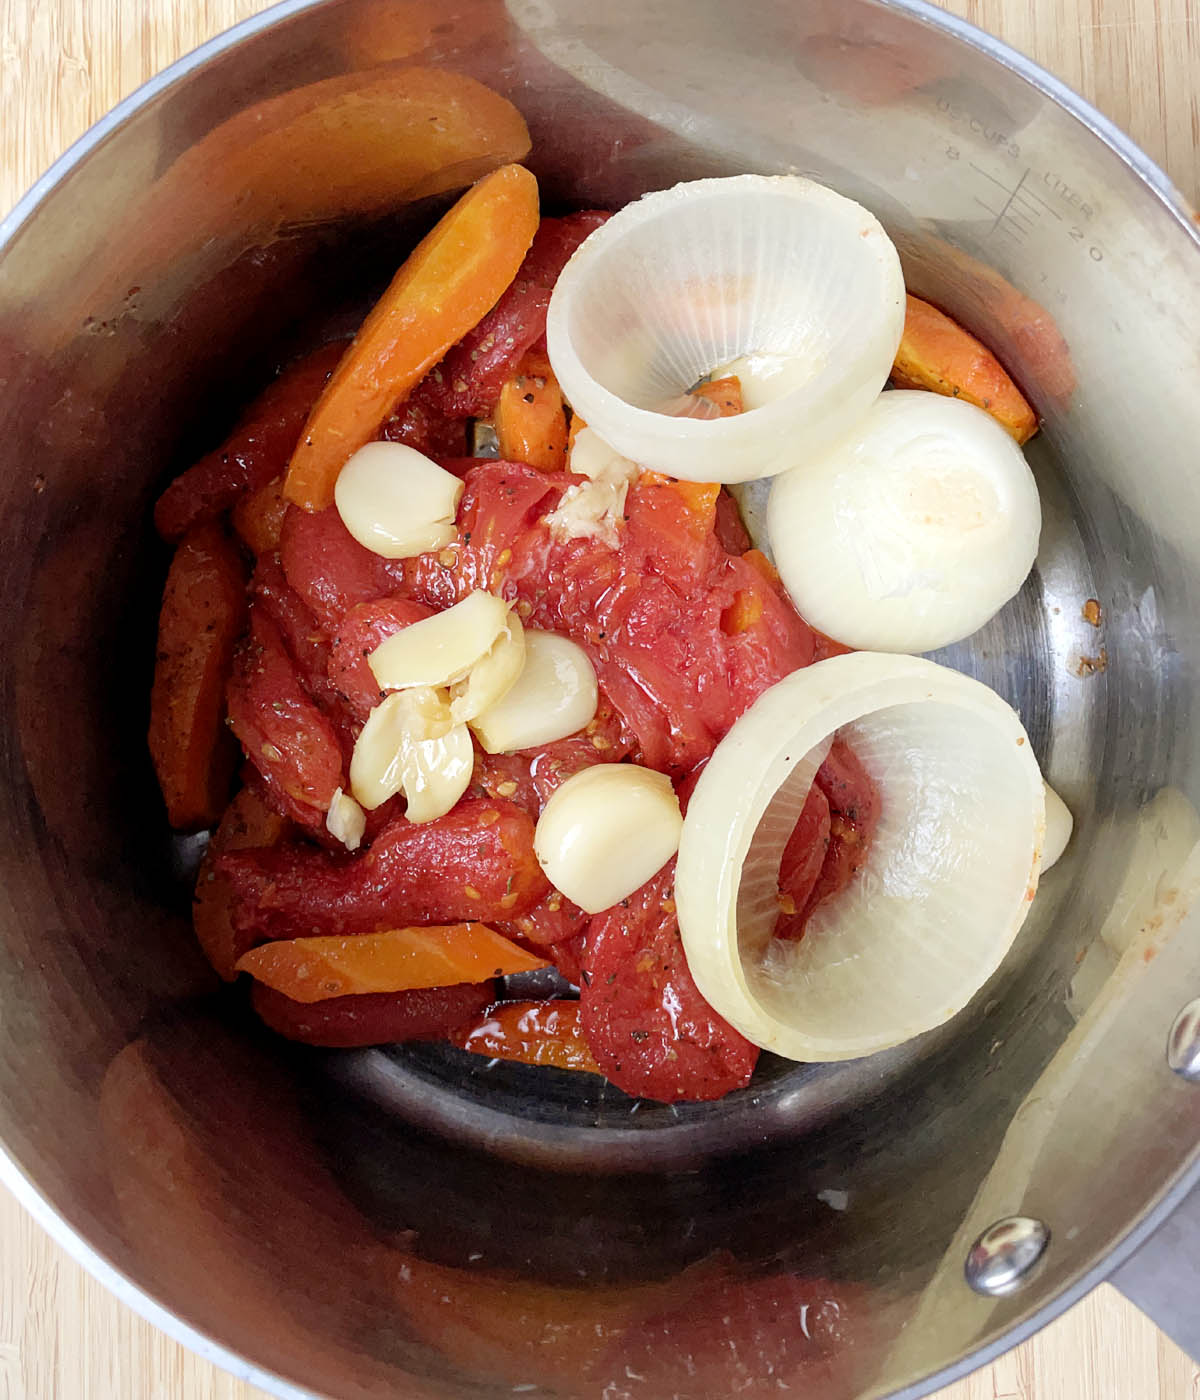 A metal pot containing red tomatoes, carrots, onions, and garlic.